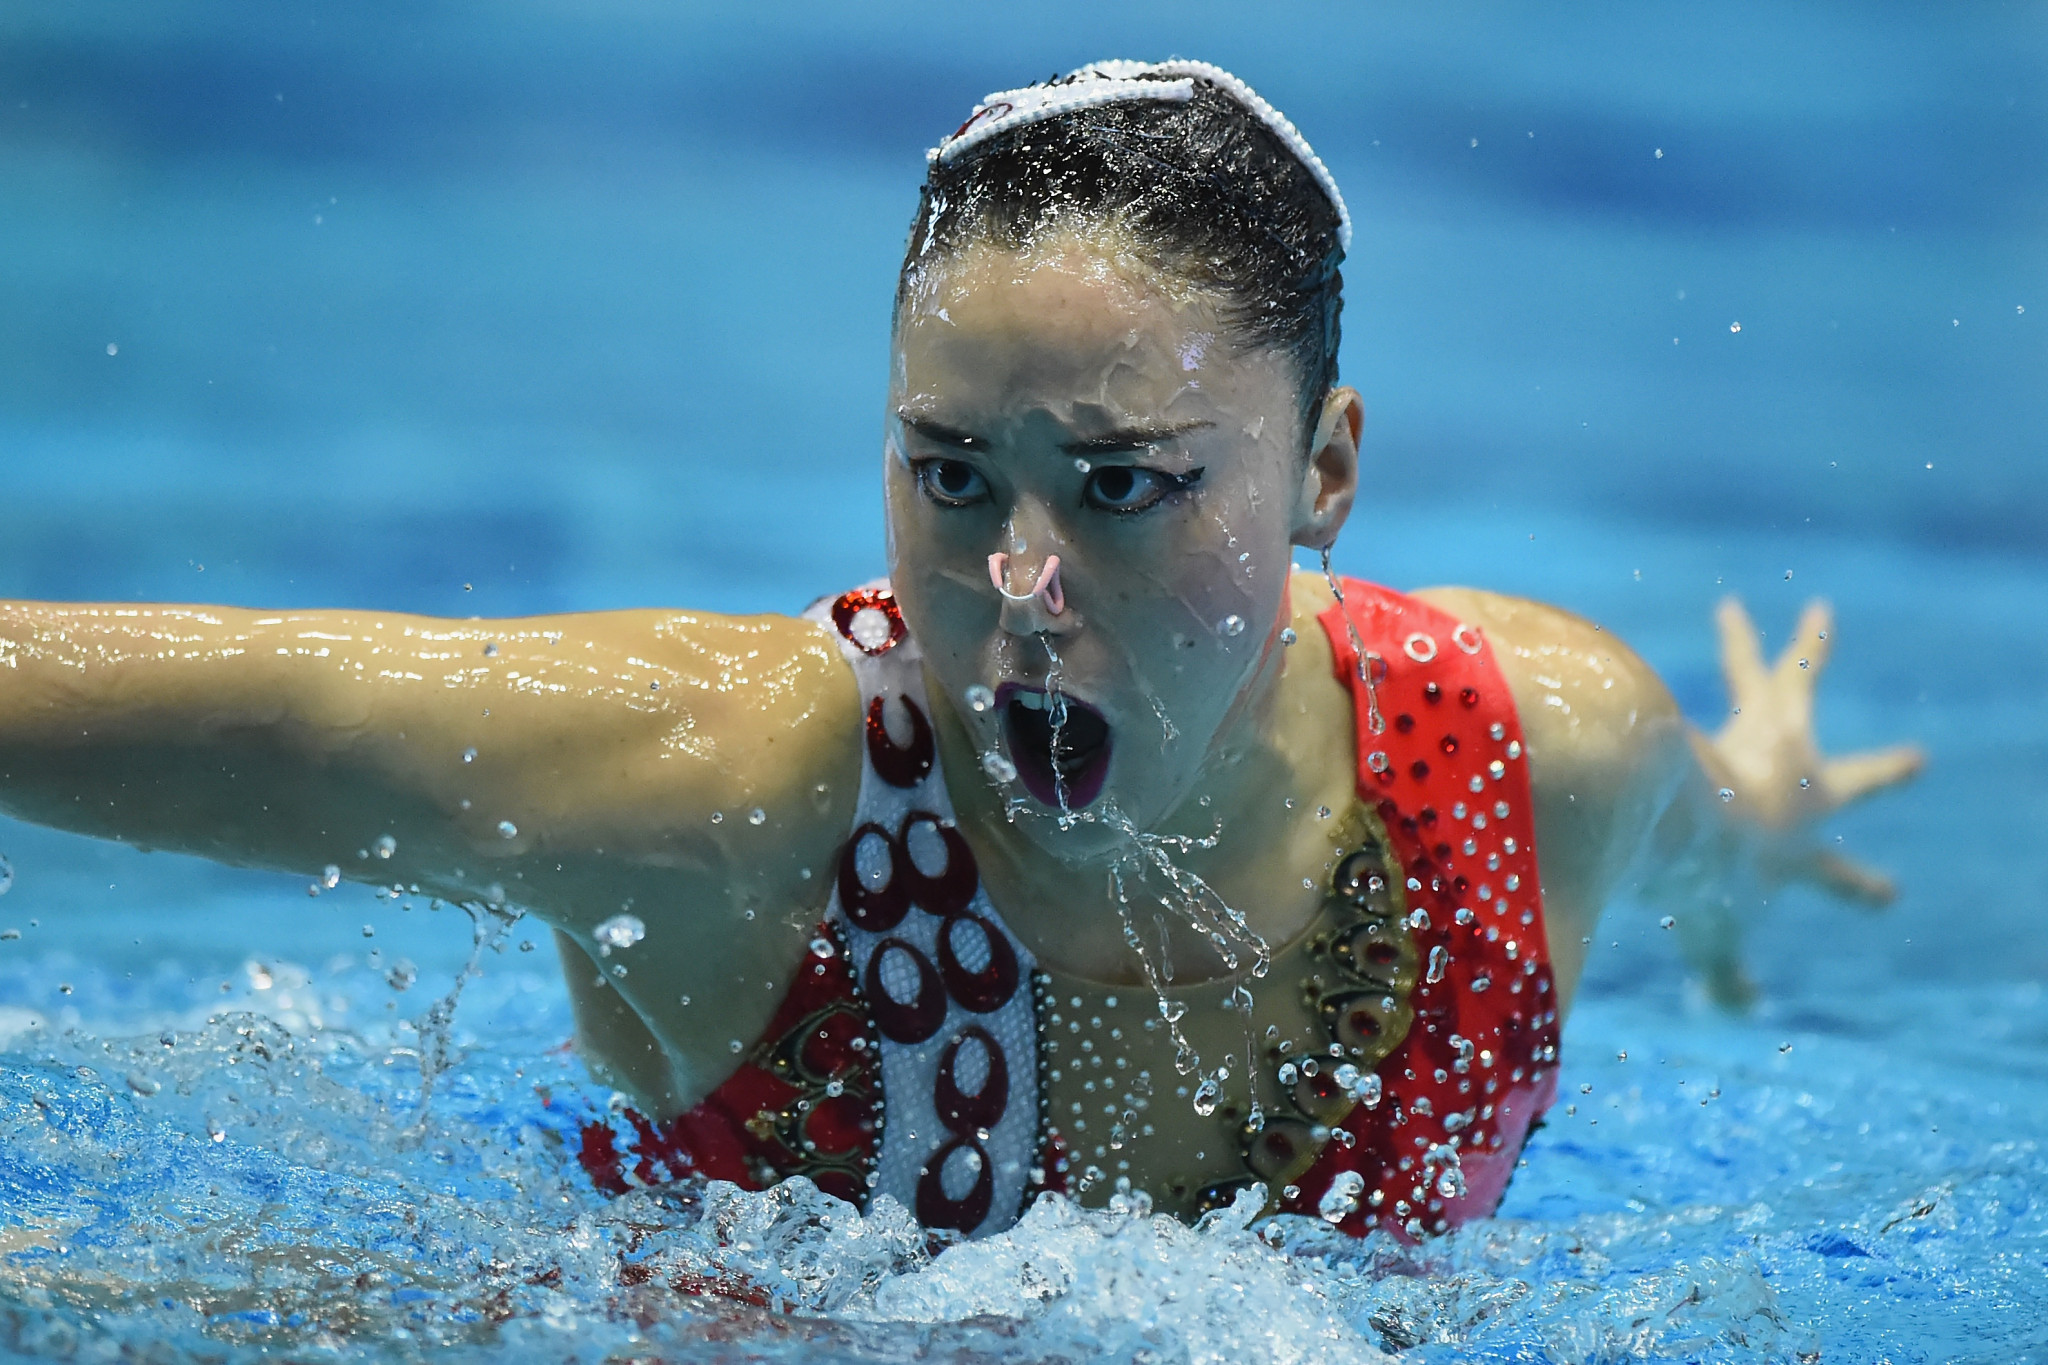 Yukiko Inui won seven golds in total on the latest leg of the FINA Artistic Swimming World Series ©Getty Images